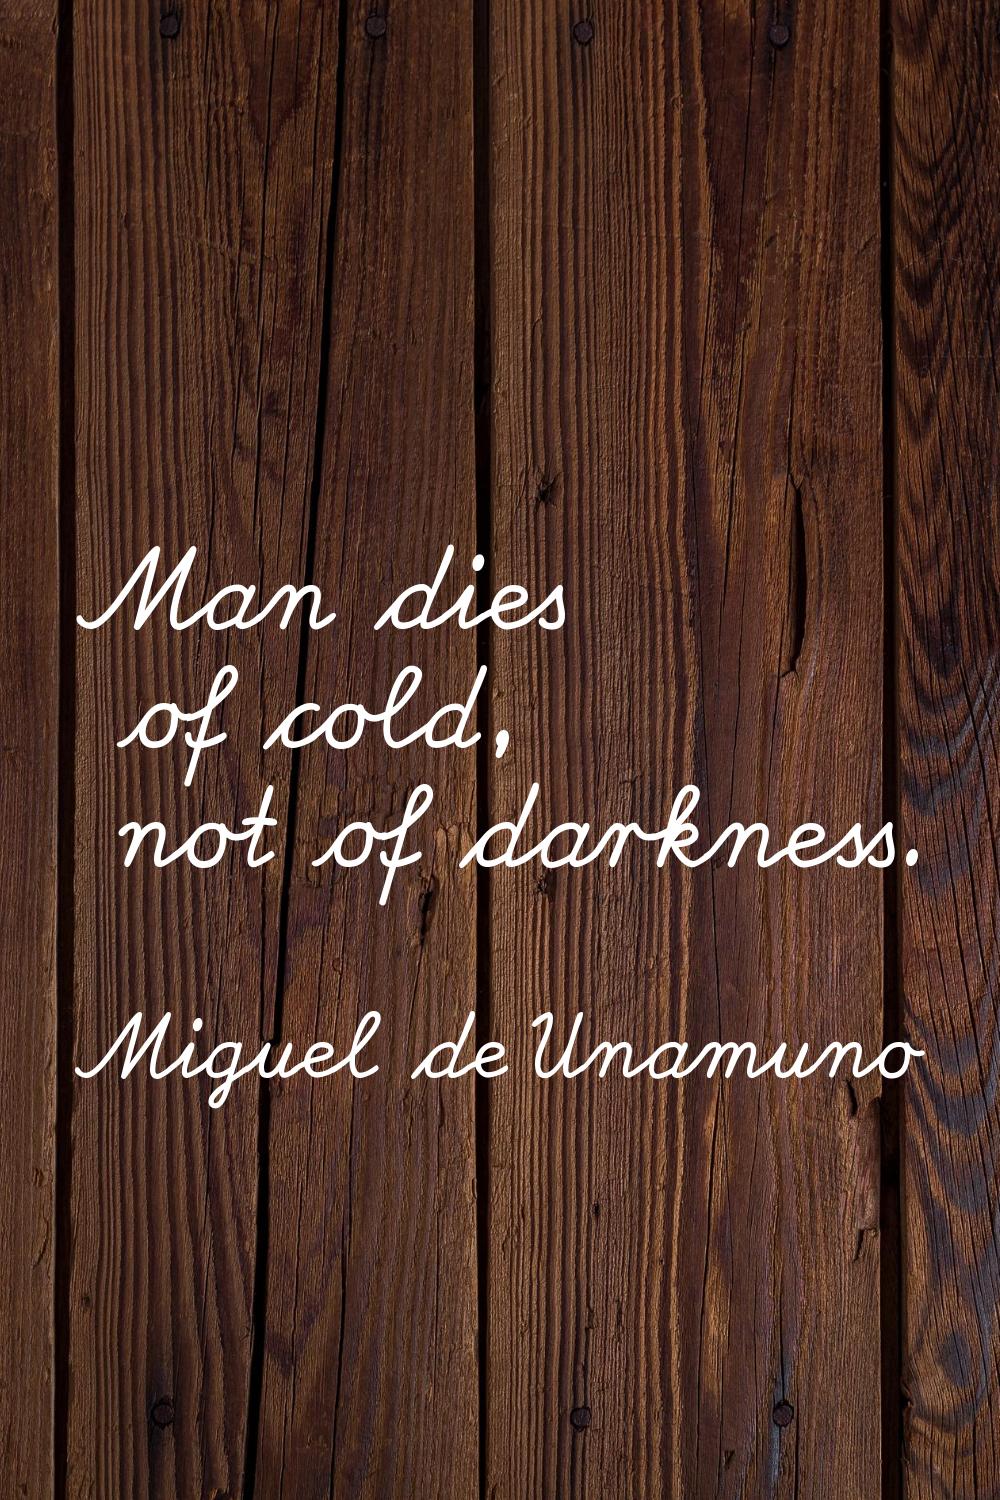 Man dies of cold, not of darkness.